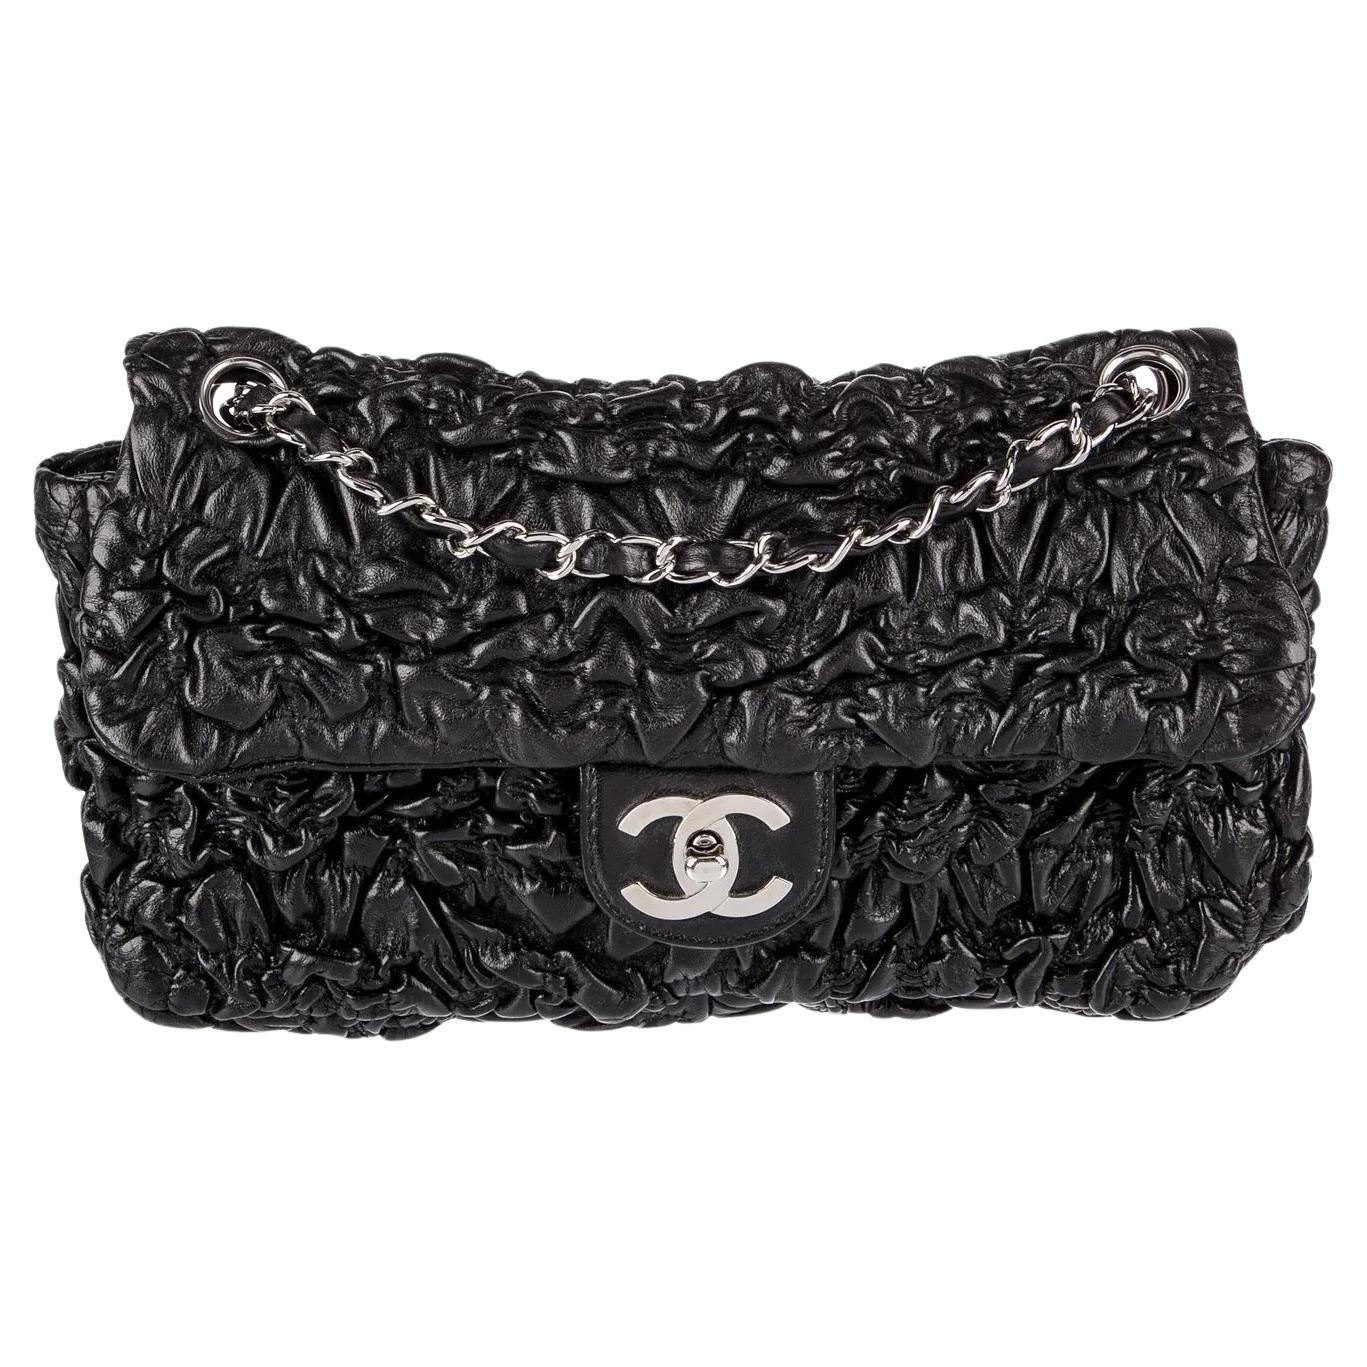 Chanel Fall 2007 Ruched Wrinkled Black Leather Medium Classic Flap Bag  For Sale